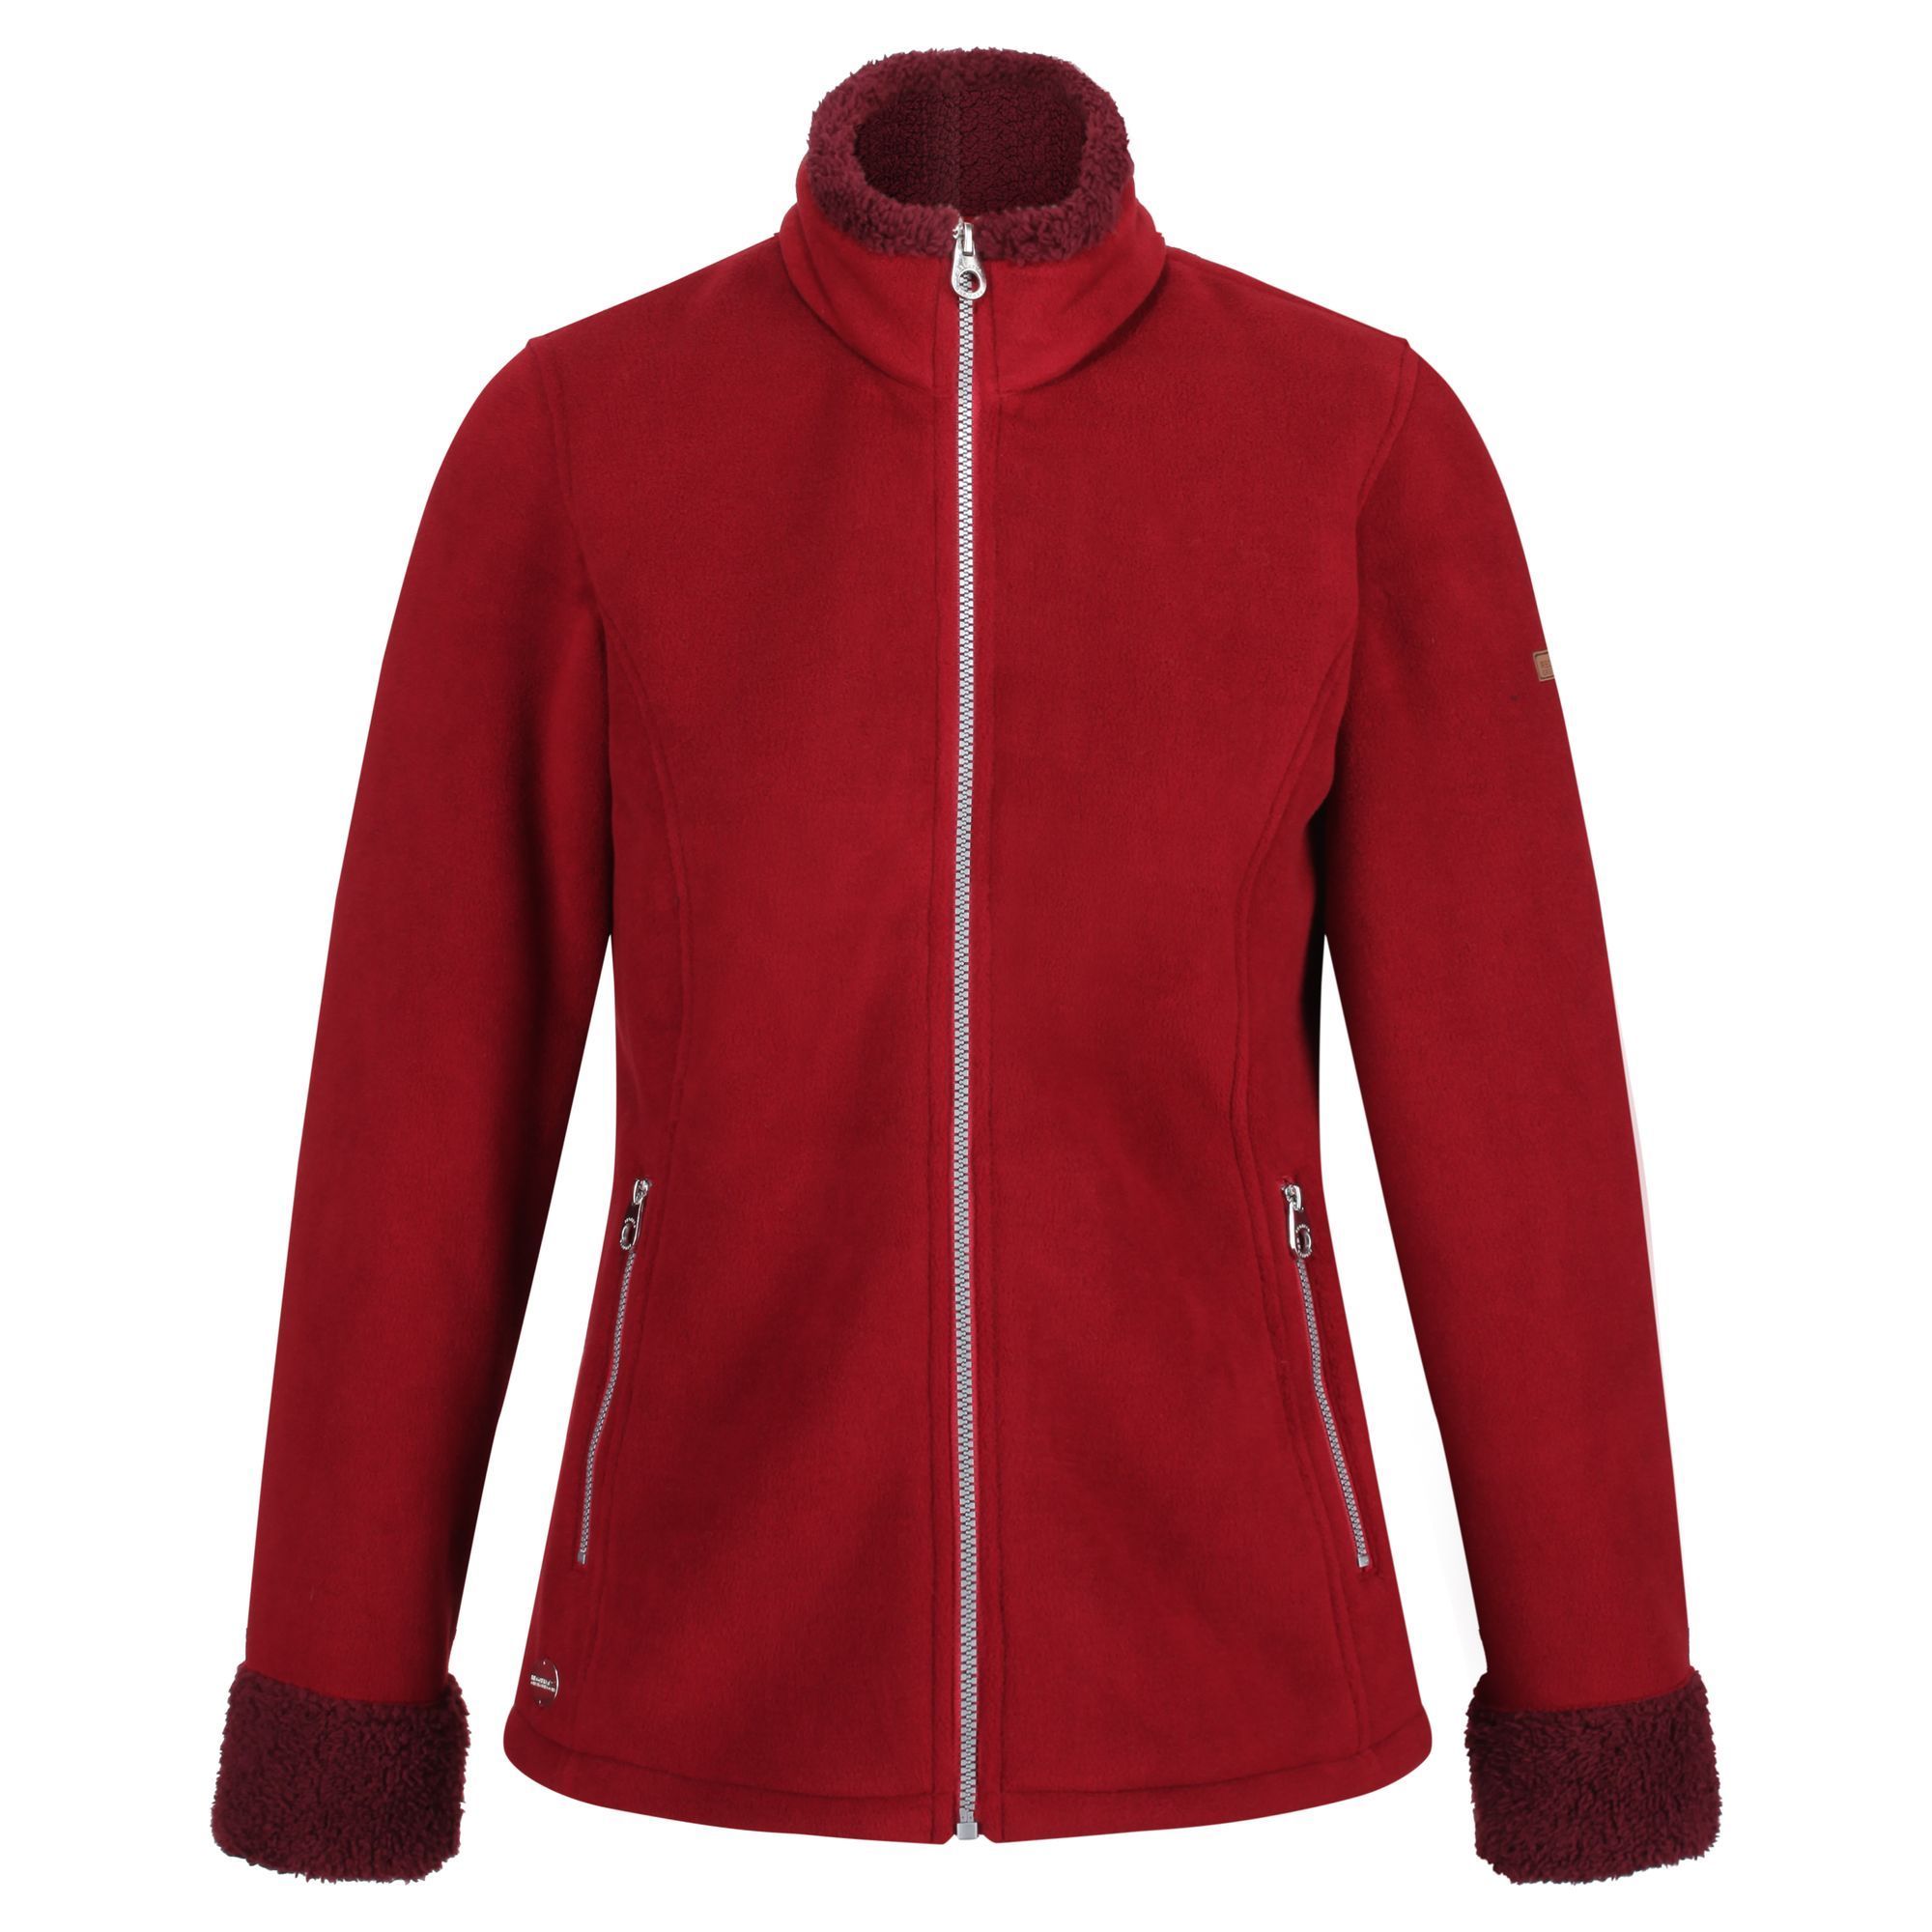 100% 430gsm polyester microfleece. Fur pile backed. 2 zipped lower pockets.